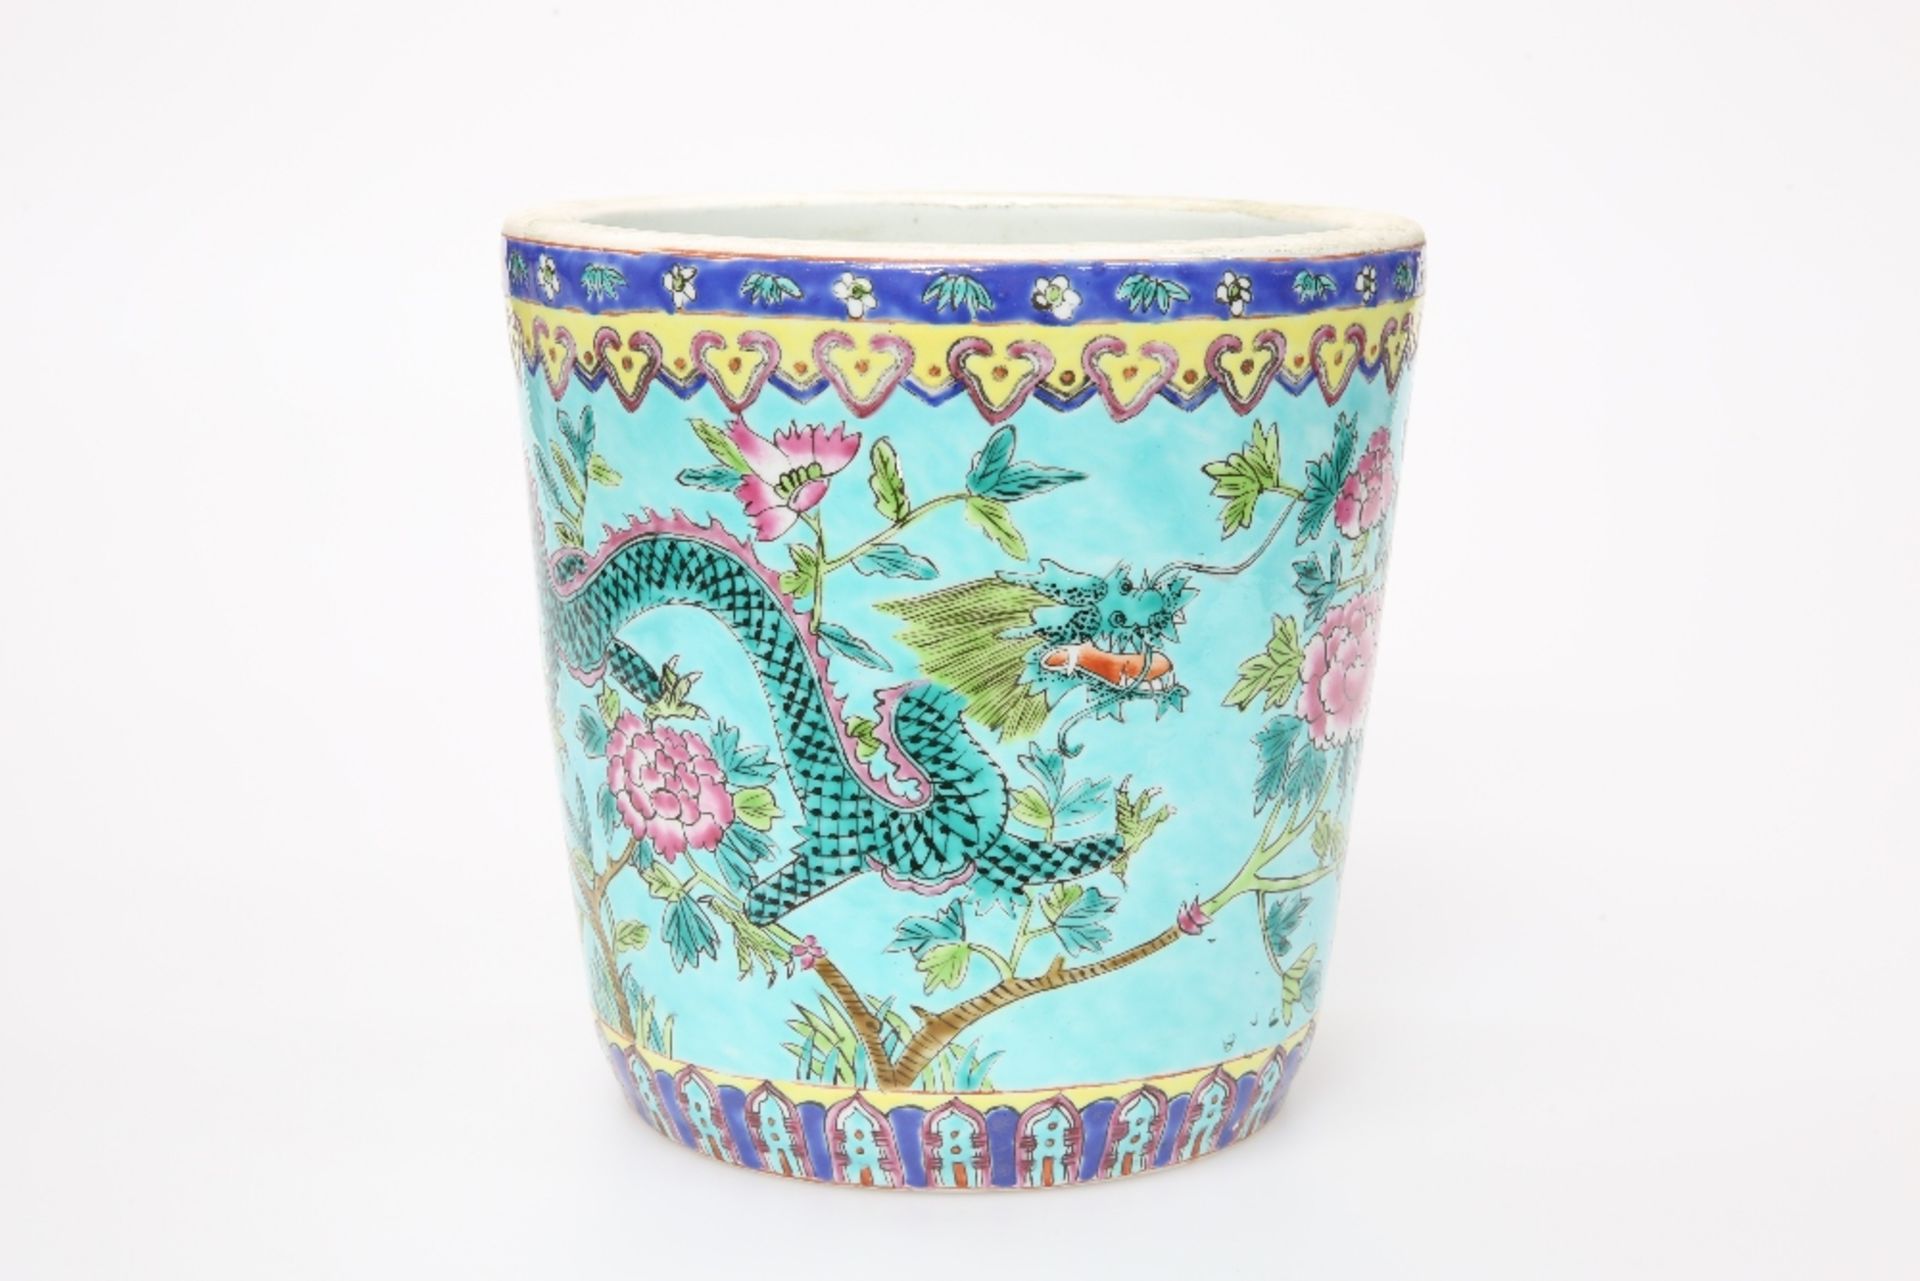 A CHINESE FAMILLE ROSE PORCELAIN JARDINIERE